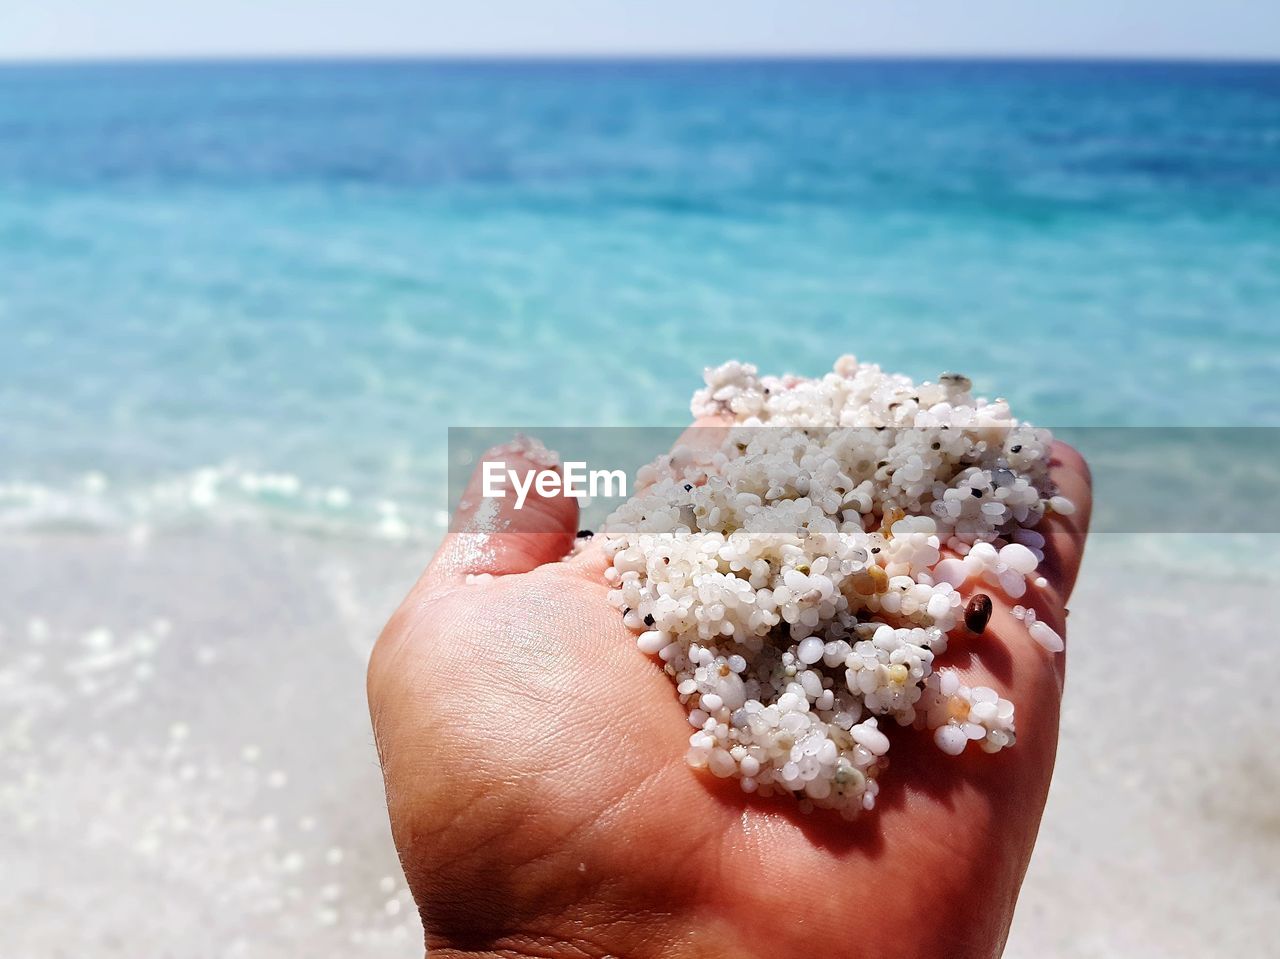 EyeEm Selects Human Body Part Beach Sea Human Hand Sand One Person Water Personal Perspective Unrecognizable Person Horizon Over Water Nature People Leisure Activity Summer Close-up Vacations Outdoors Lifestyles Day Beauty In Nature Mix Yourself A Good Time